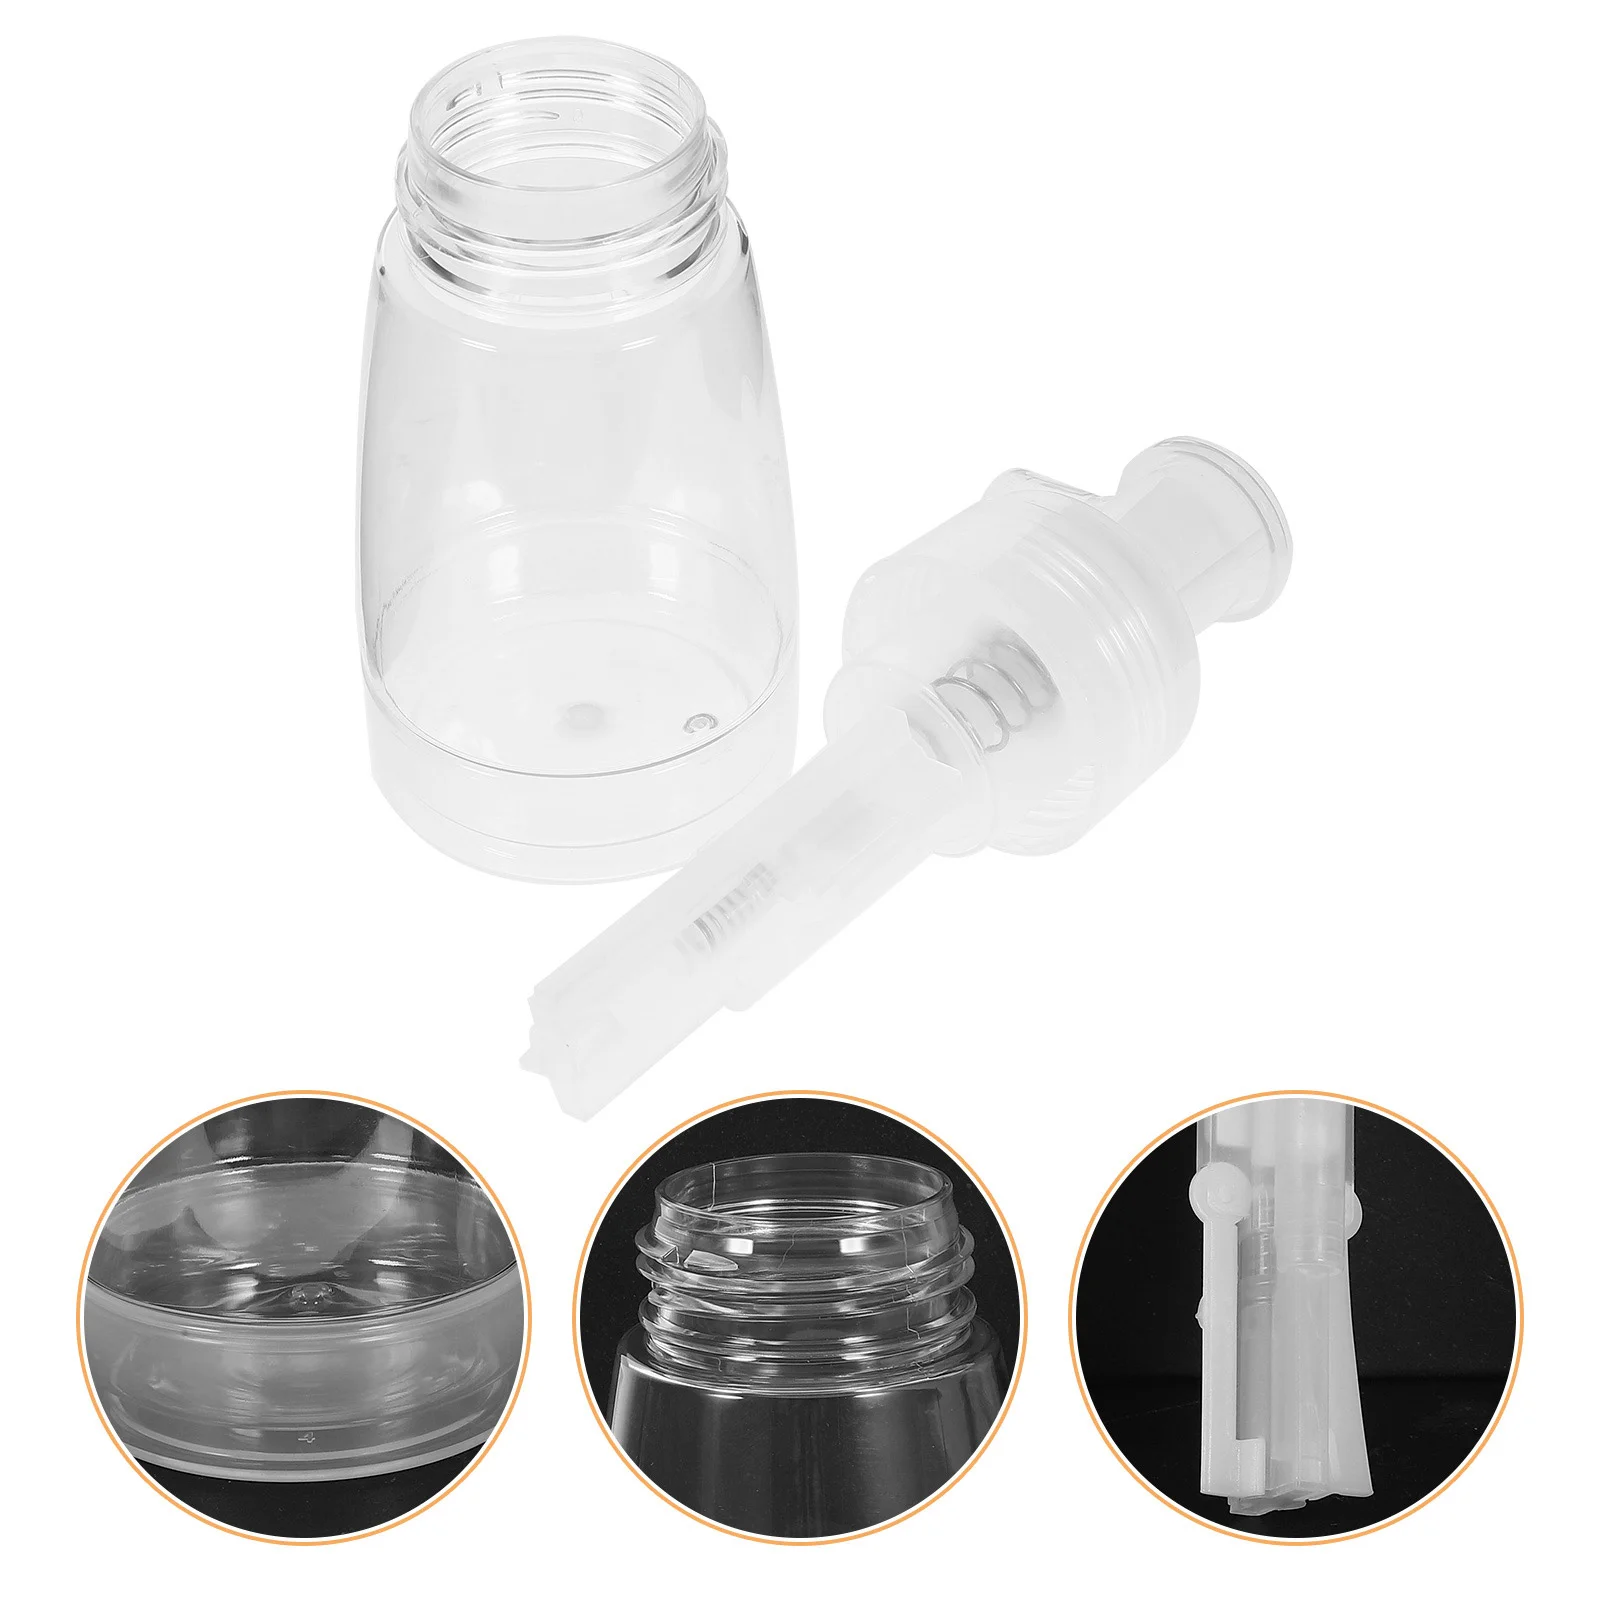 

Powder Spray Bottle Loose Empty Bottles Storage Talcum Container Lotion Makeup Skin Care Travel Baby